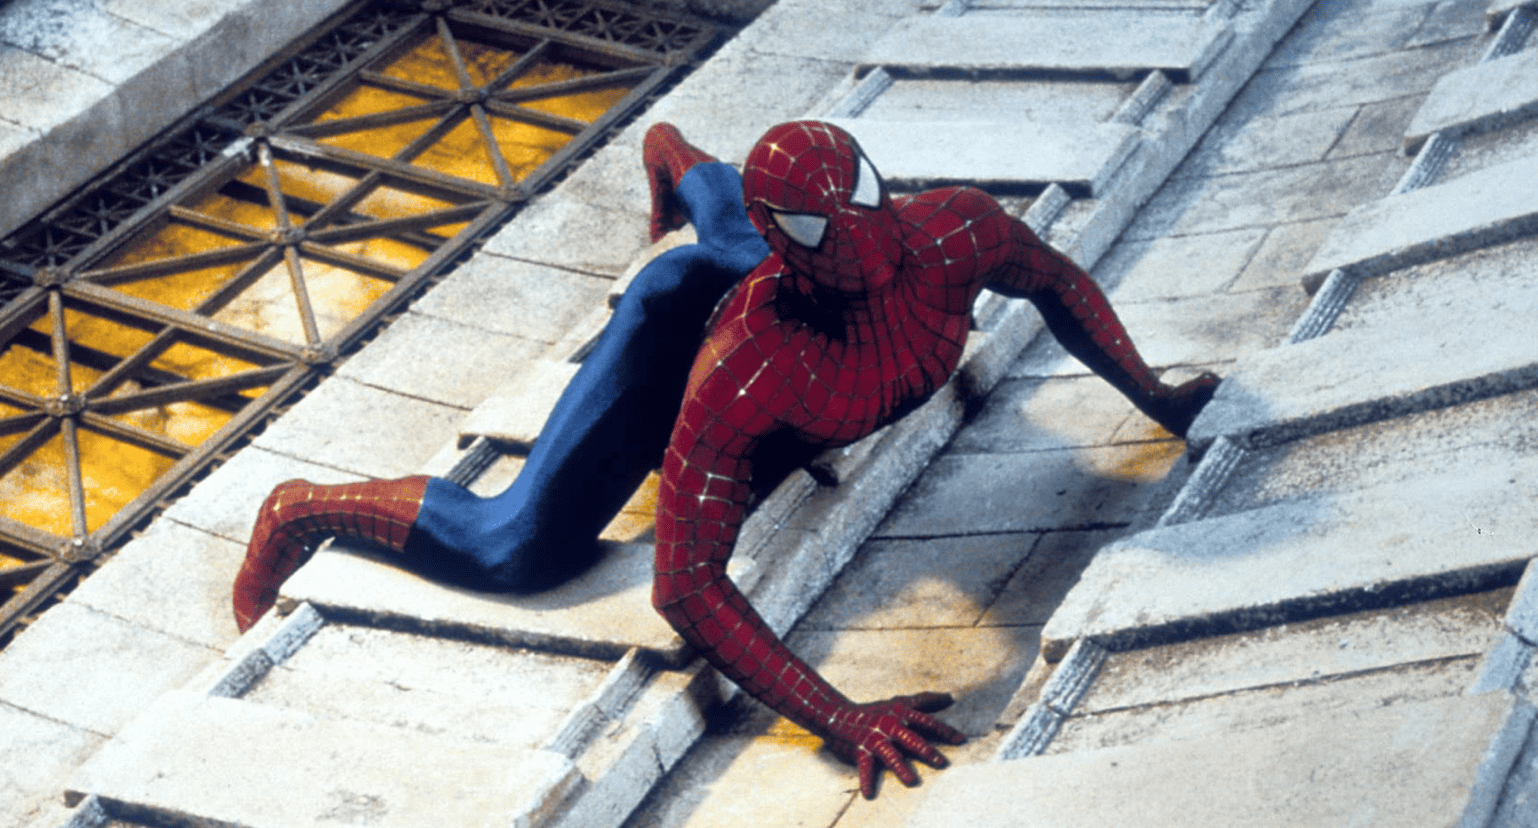 Spider-Man crawling on the side of a building in this image from Columbia Pictures